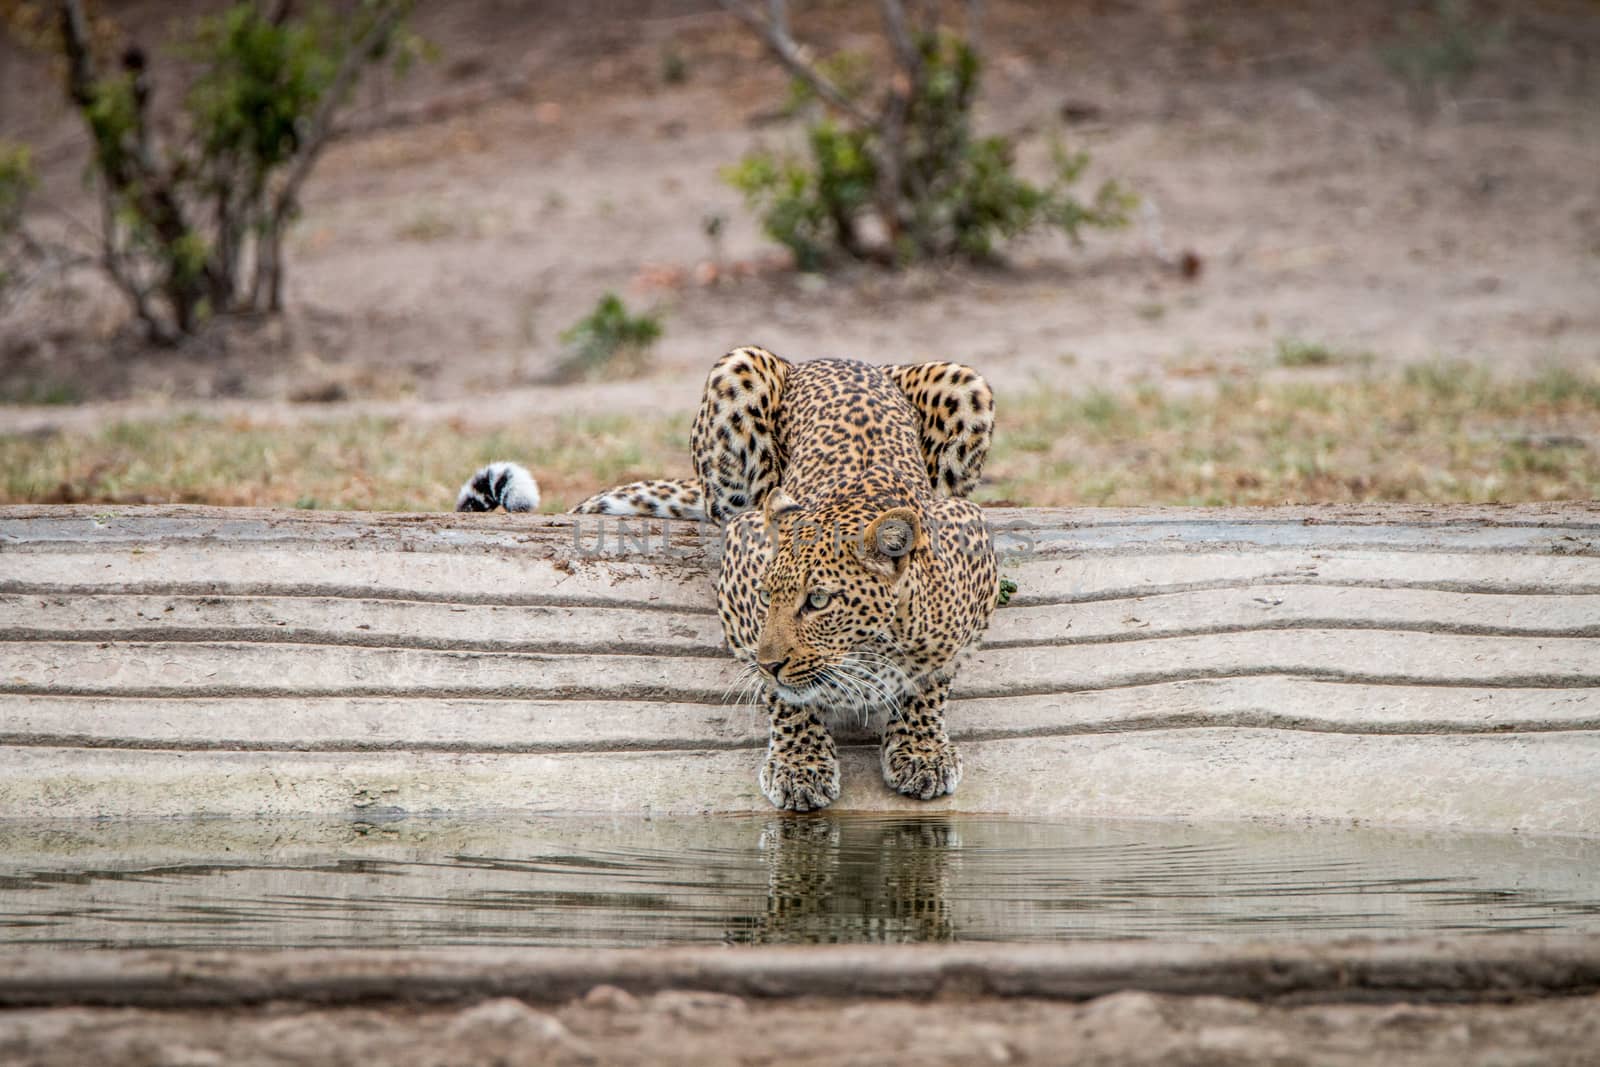 Leopard at a waterhole in the Kruger National Park, South Africa.